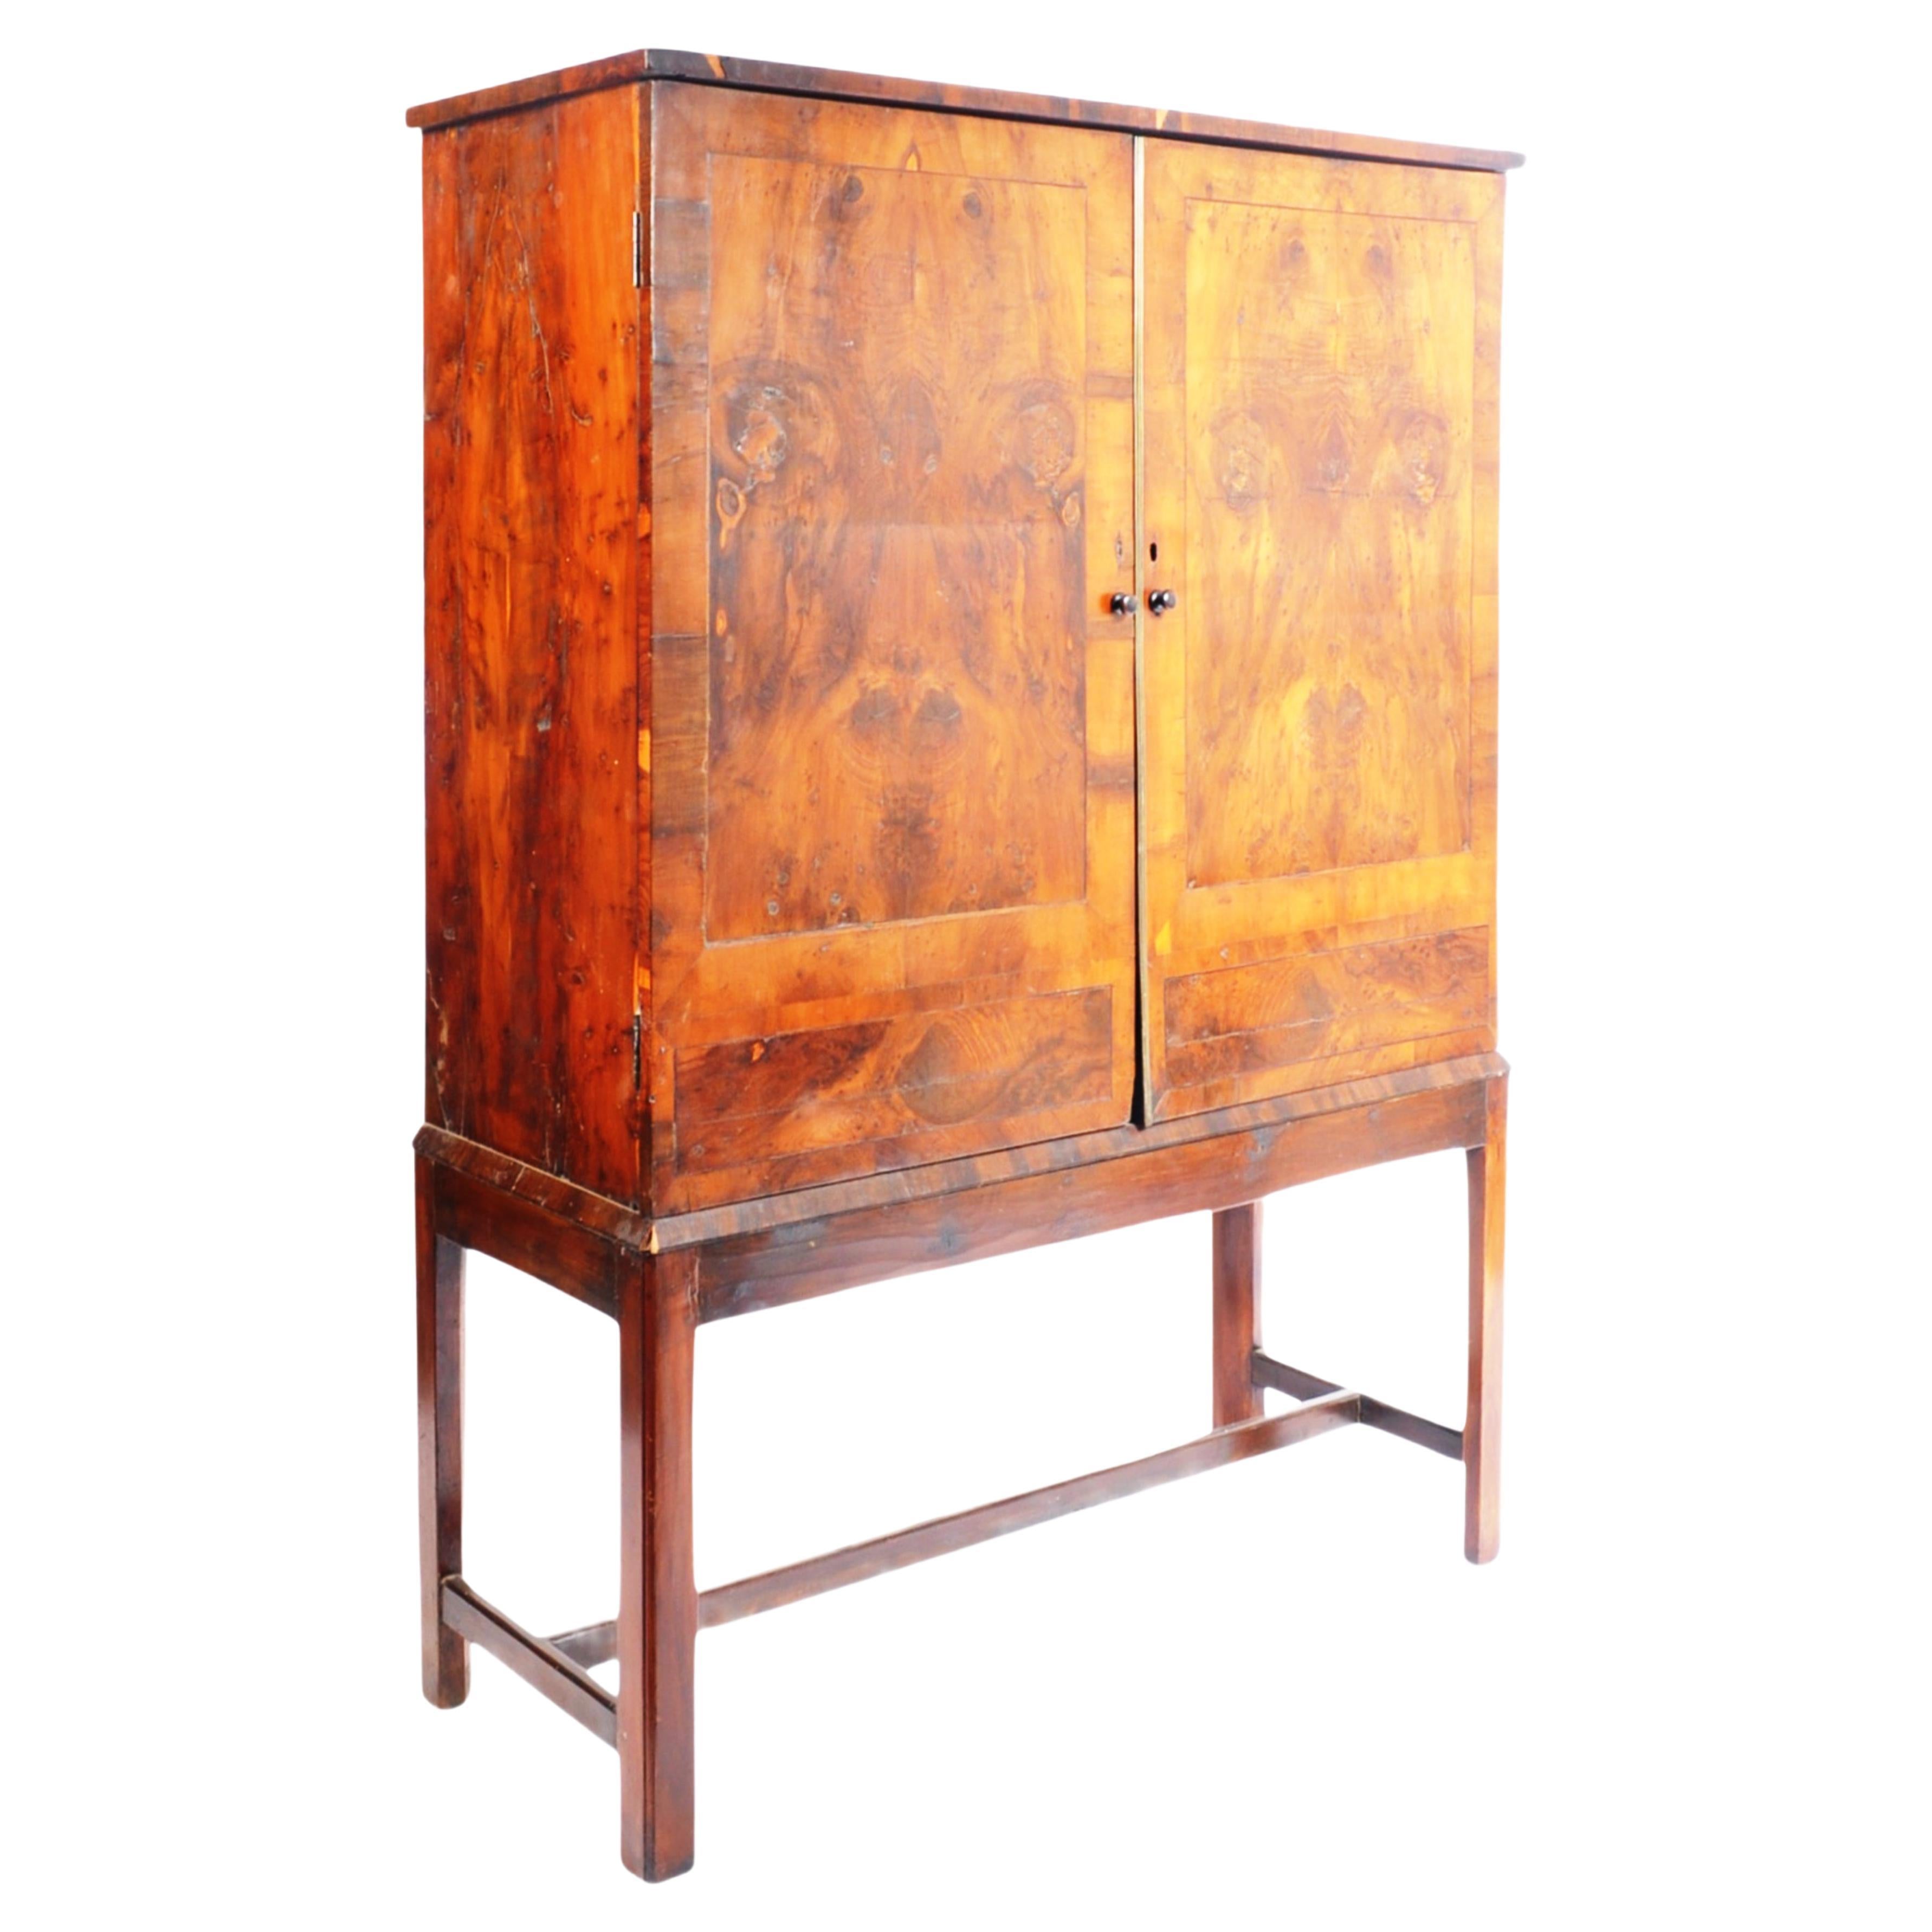 Rare 18th Century Library Yew Wood Specimen Collectors Cabinet Chest on Stand For Sale